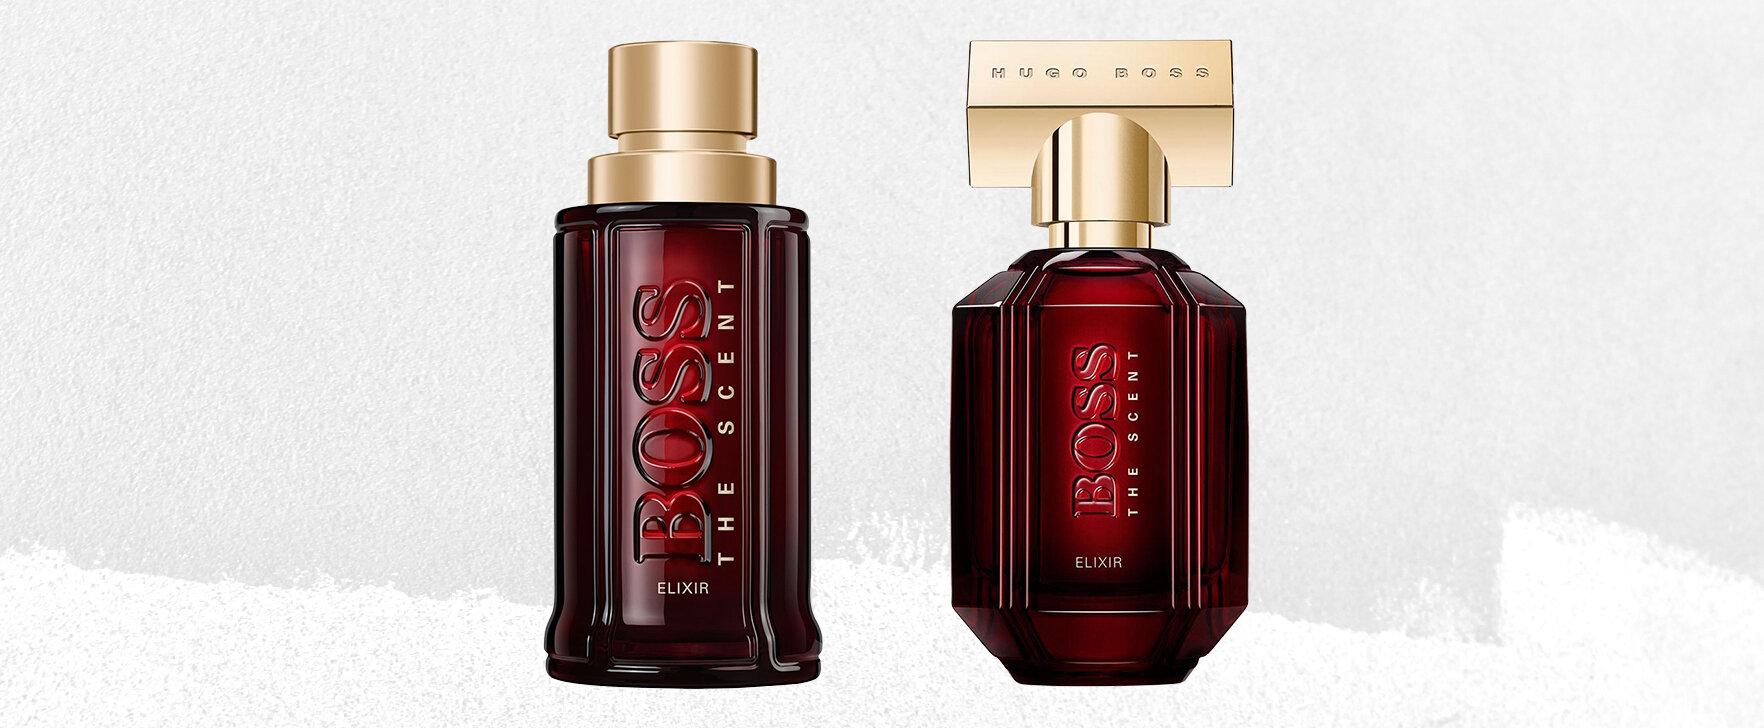 Intense Sensuality: The Scent Elixir for Her and The Scent Elixir for Him by Hugo Boss